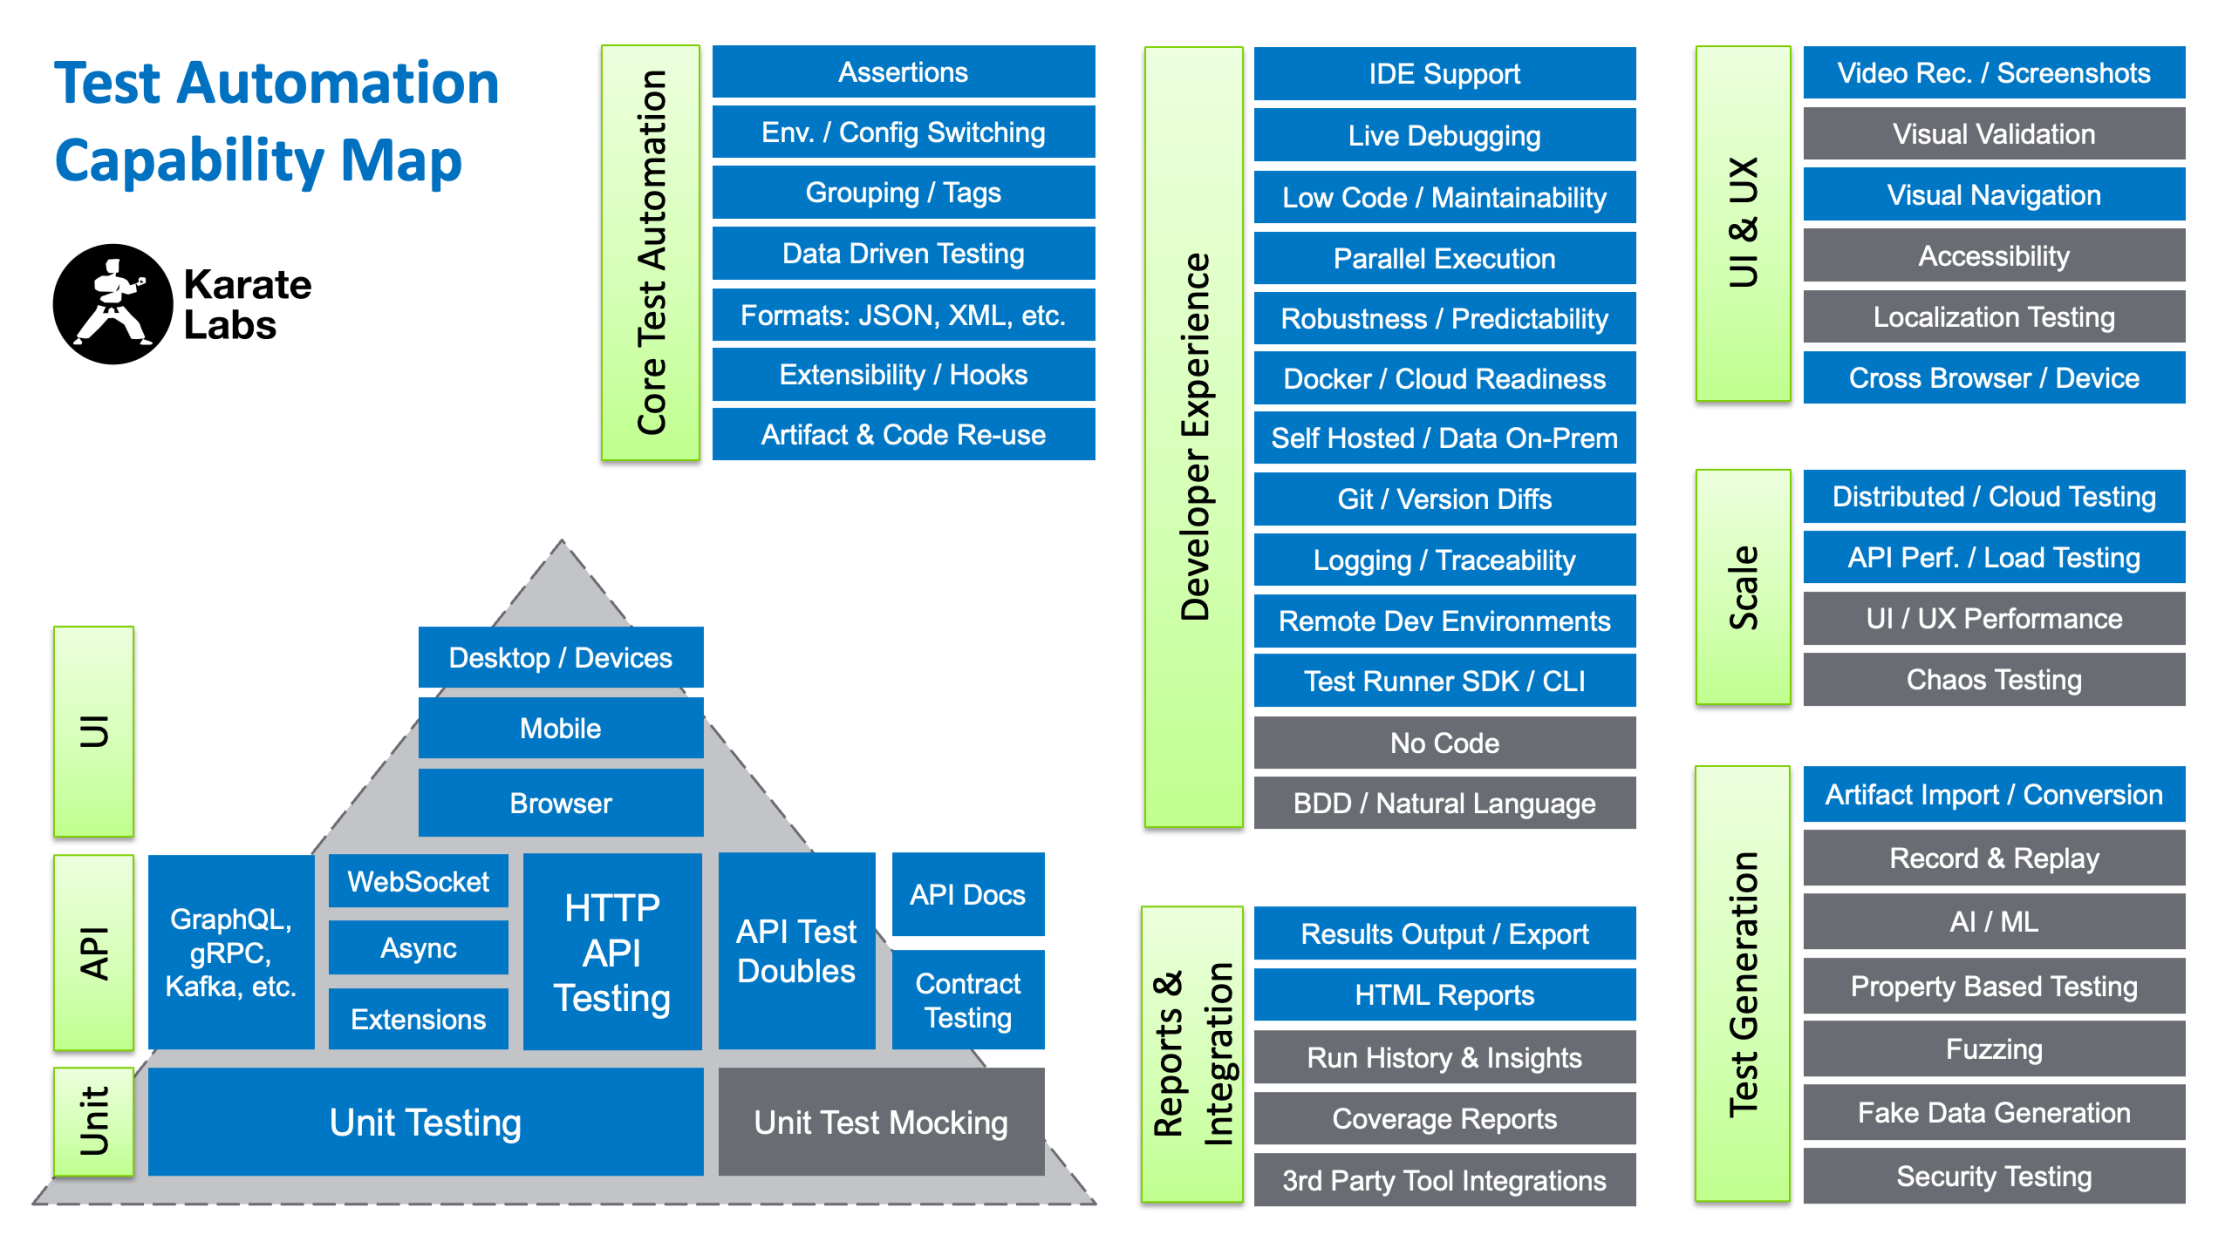 The Test Automation Capability Map